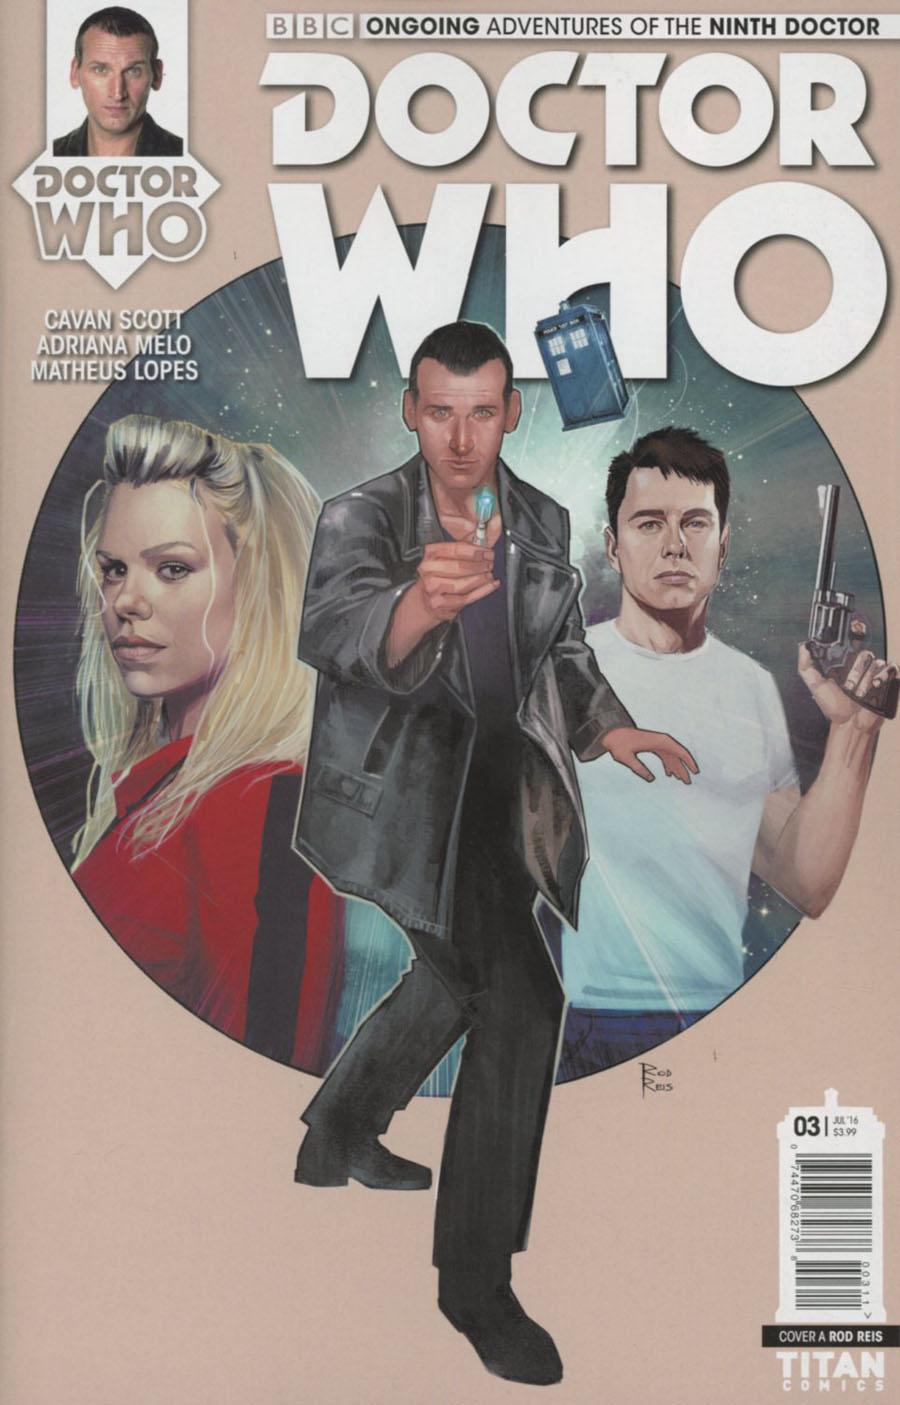 Doctor Who 9th Doctor Vol. 2 #3